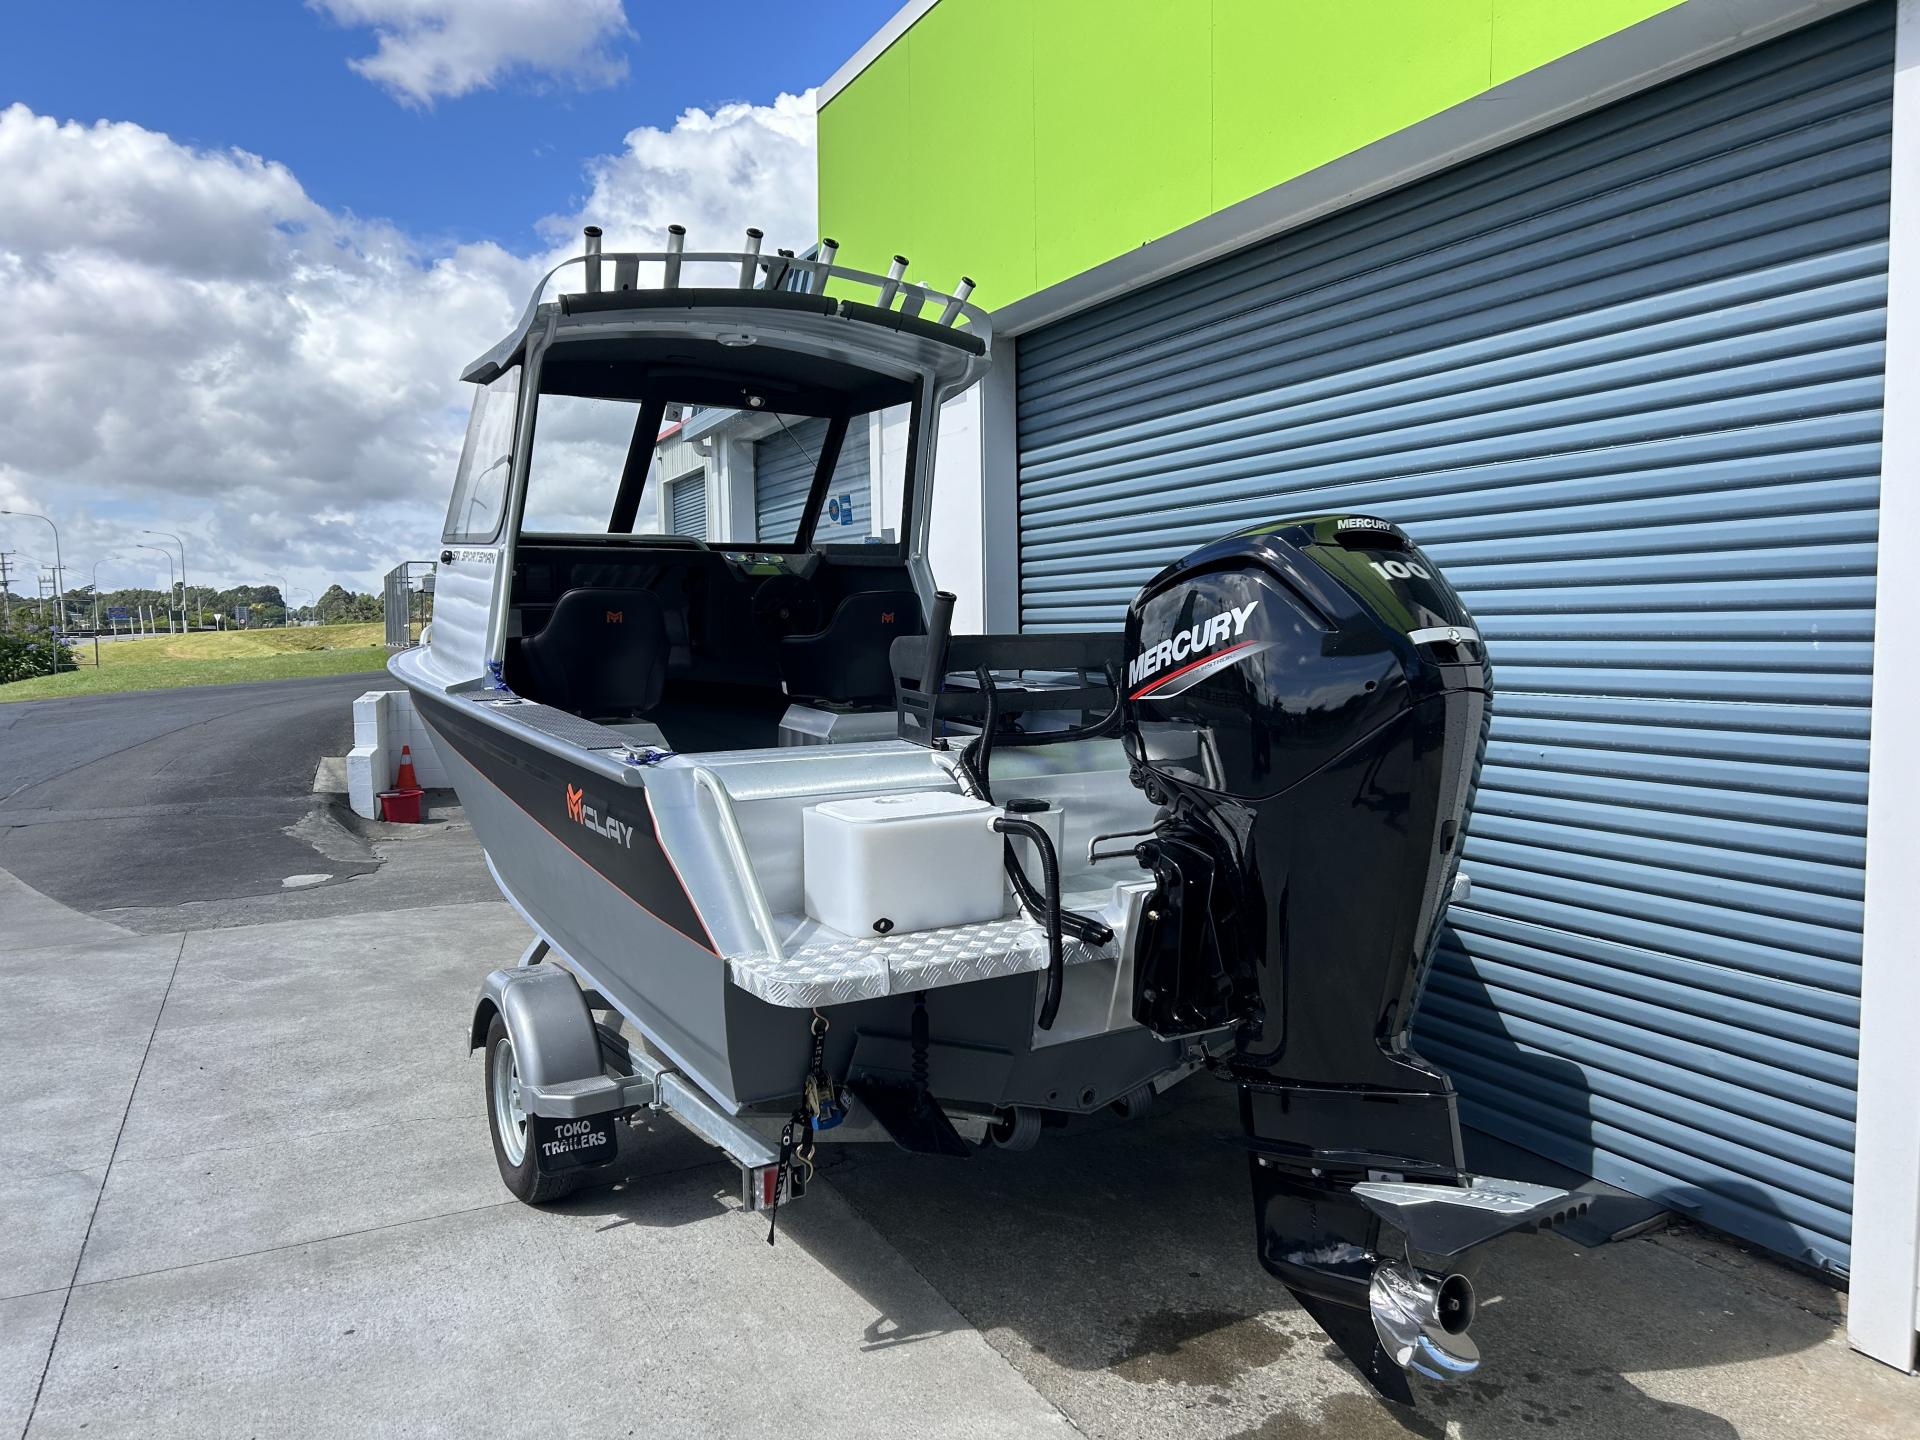 Mclay 571HT - Boats, Outboards & Accessories - Boat City Wellington